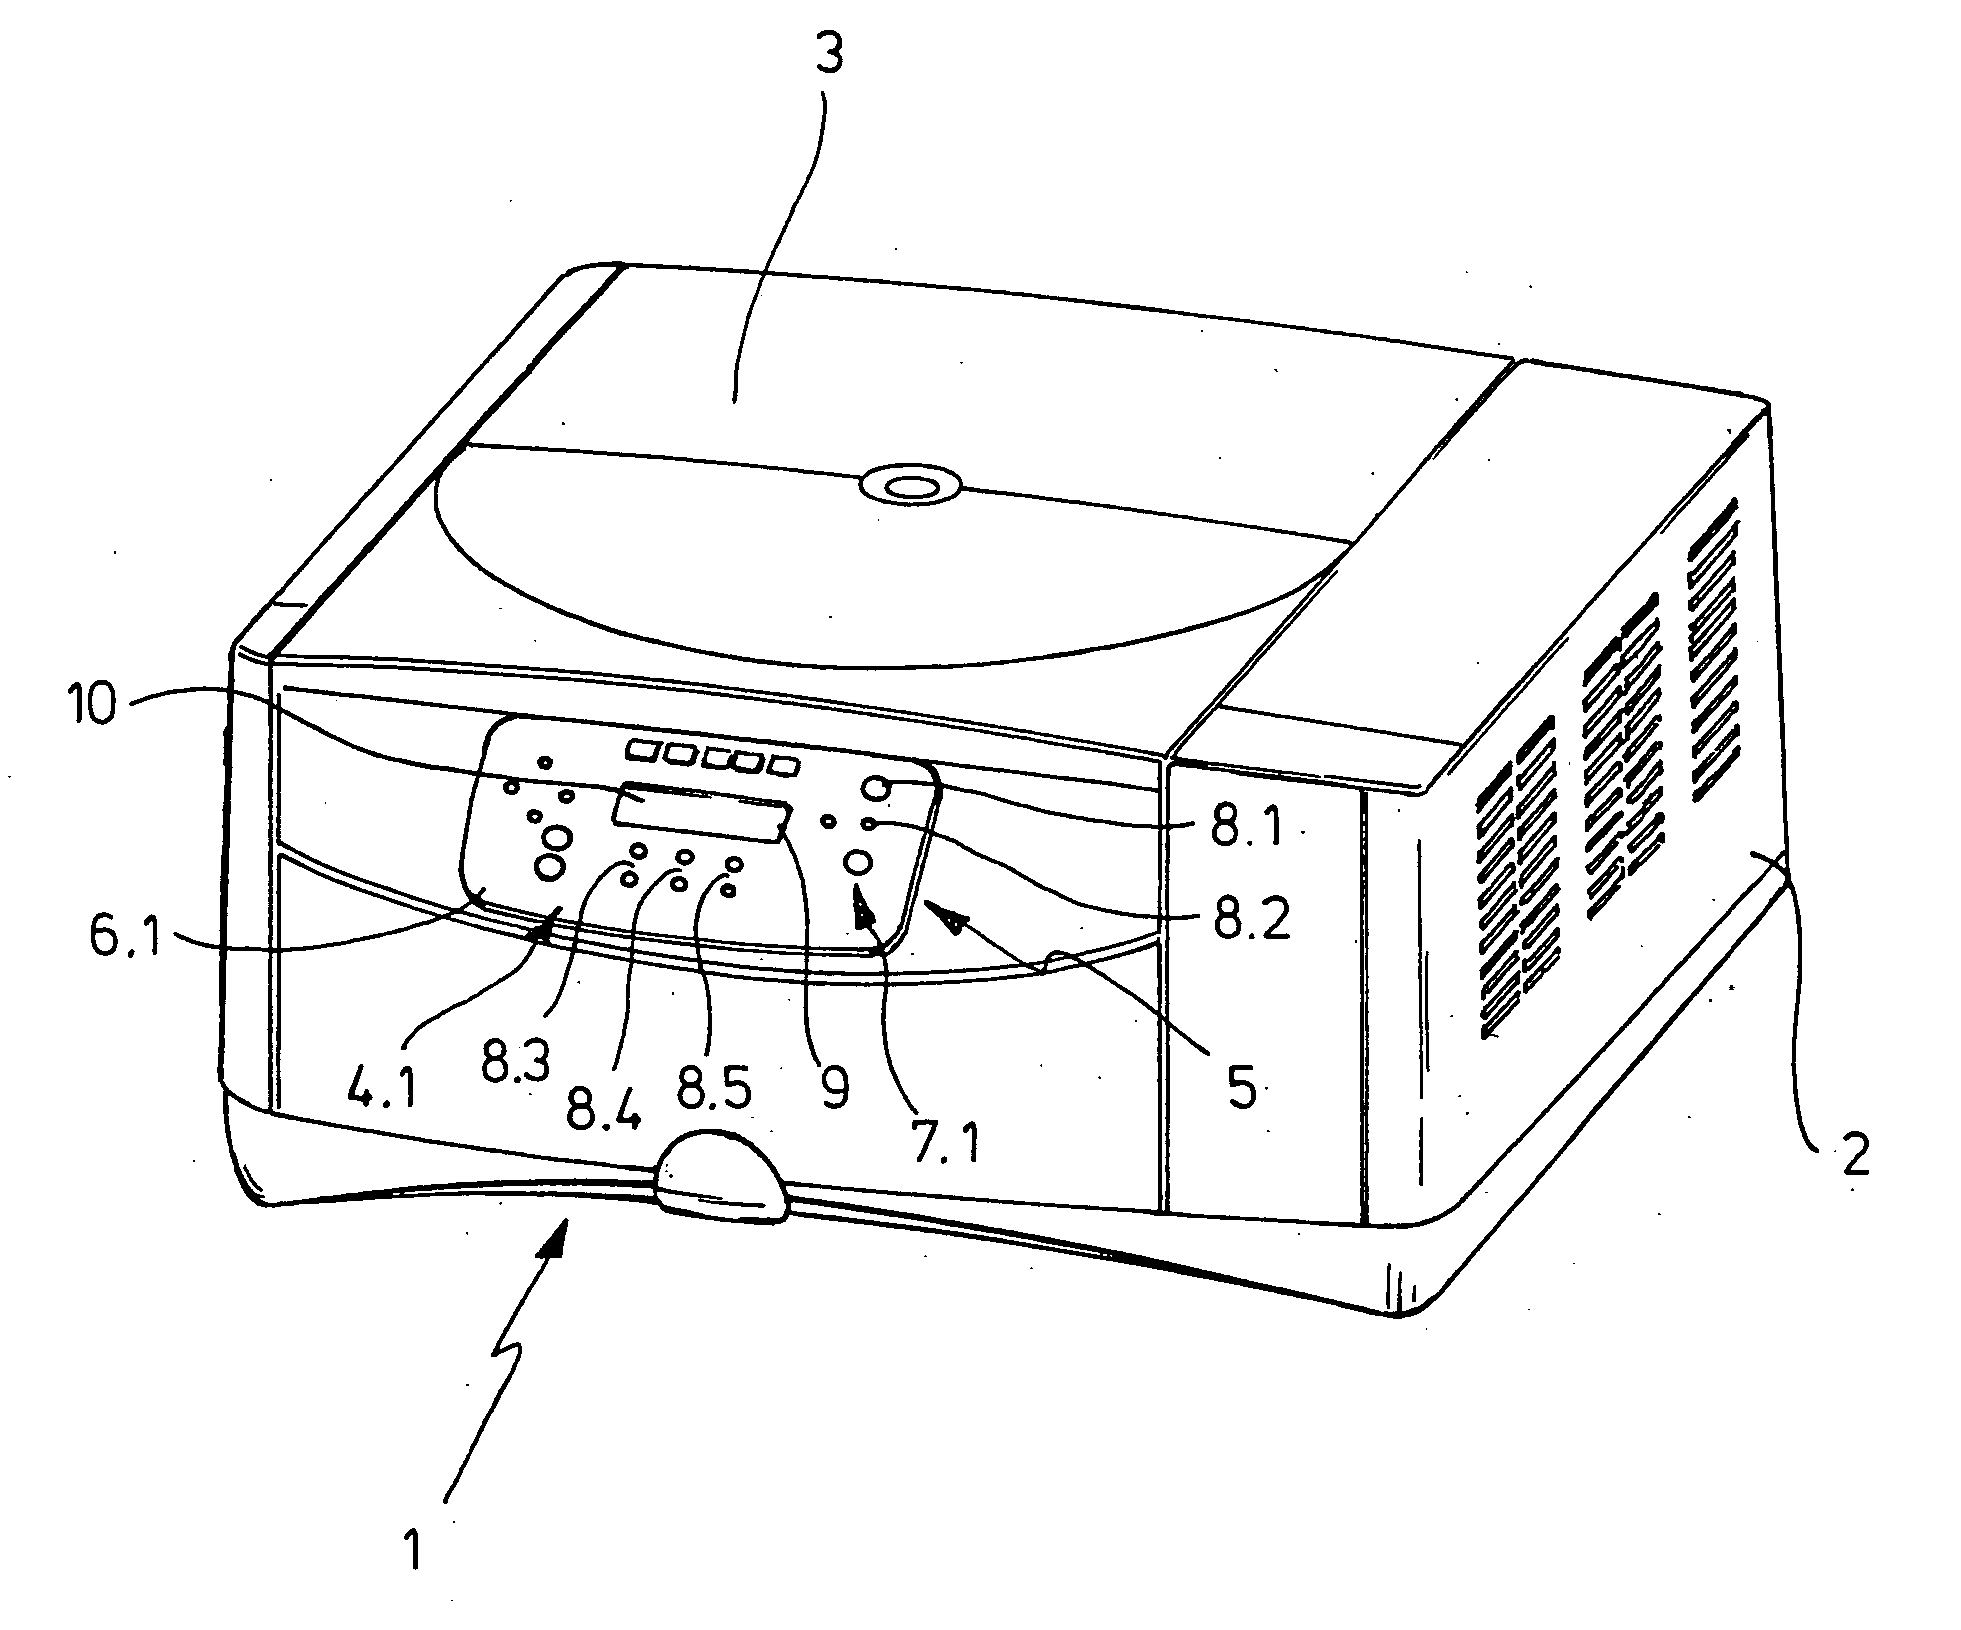 Laboratory apparatus with a control device